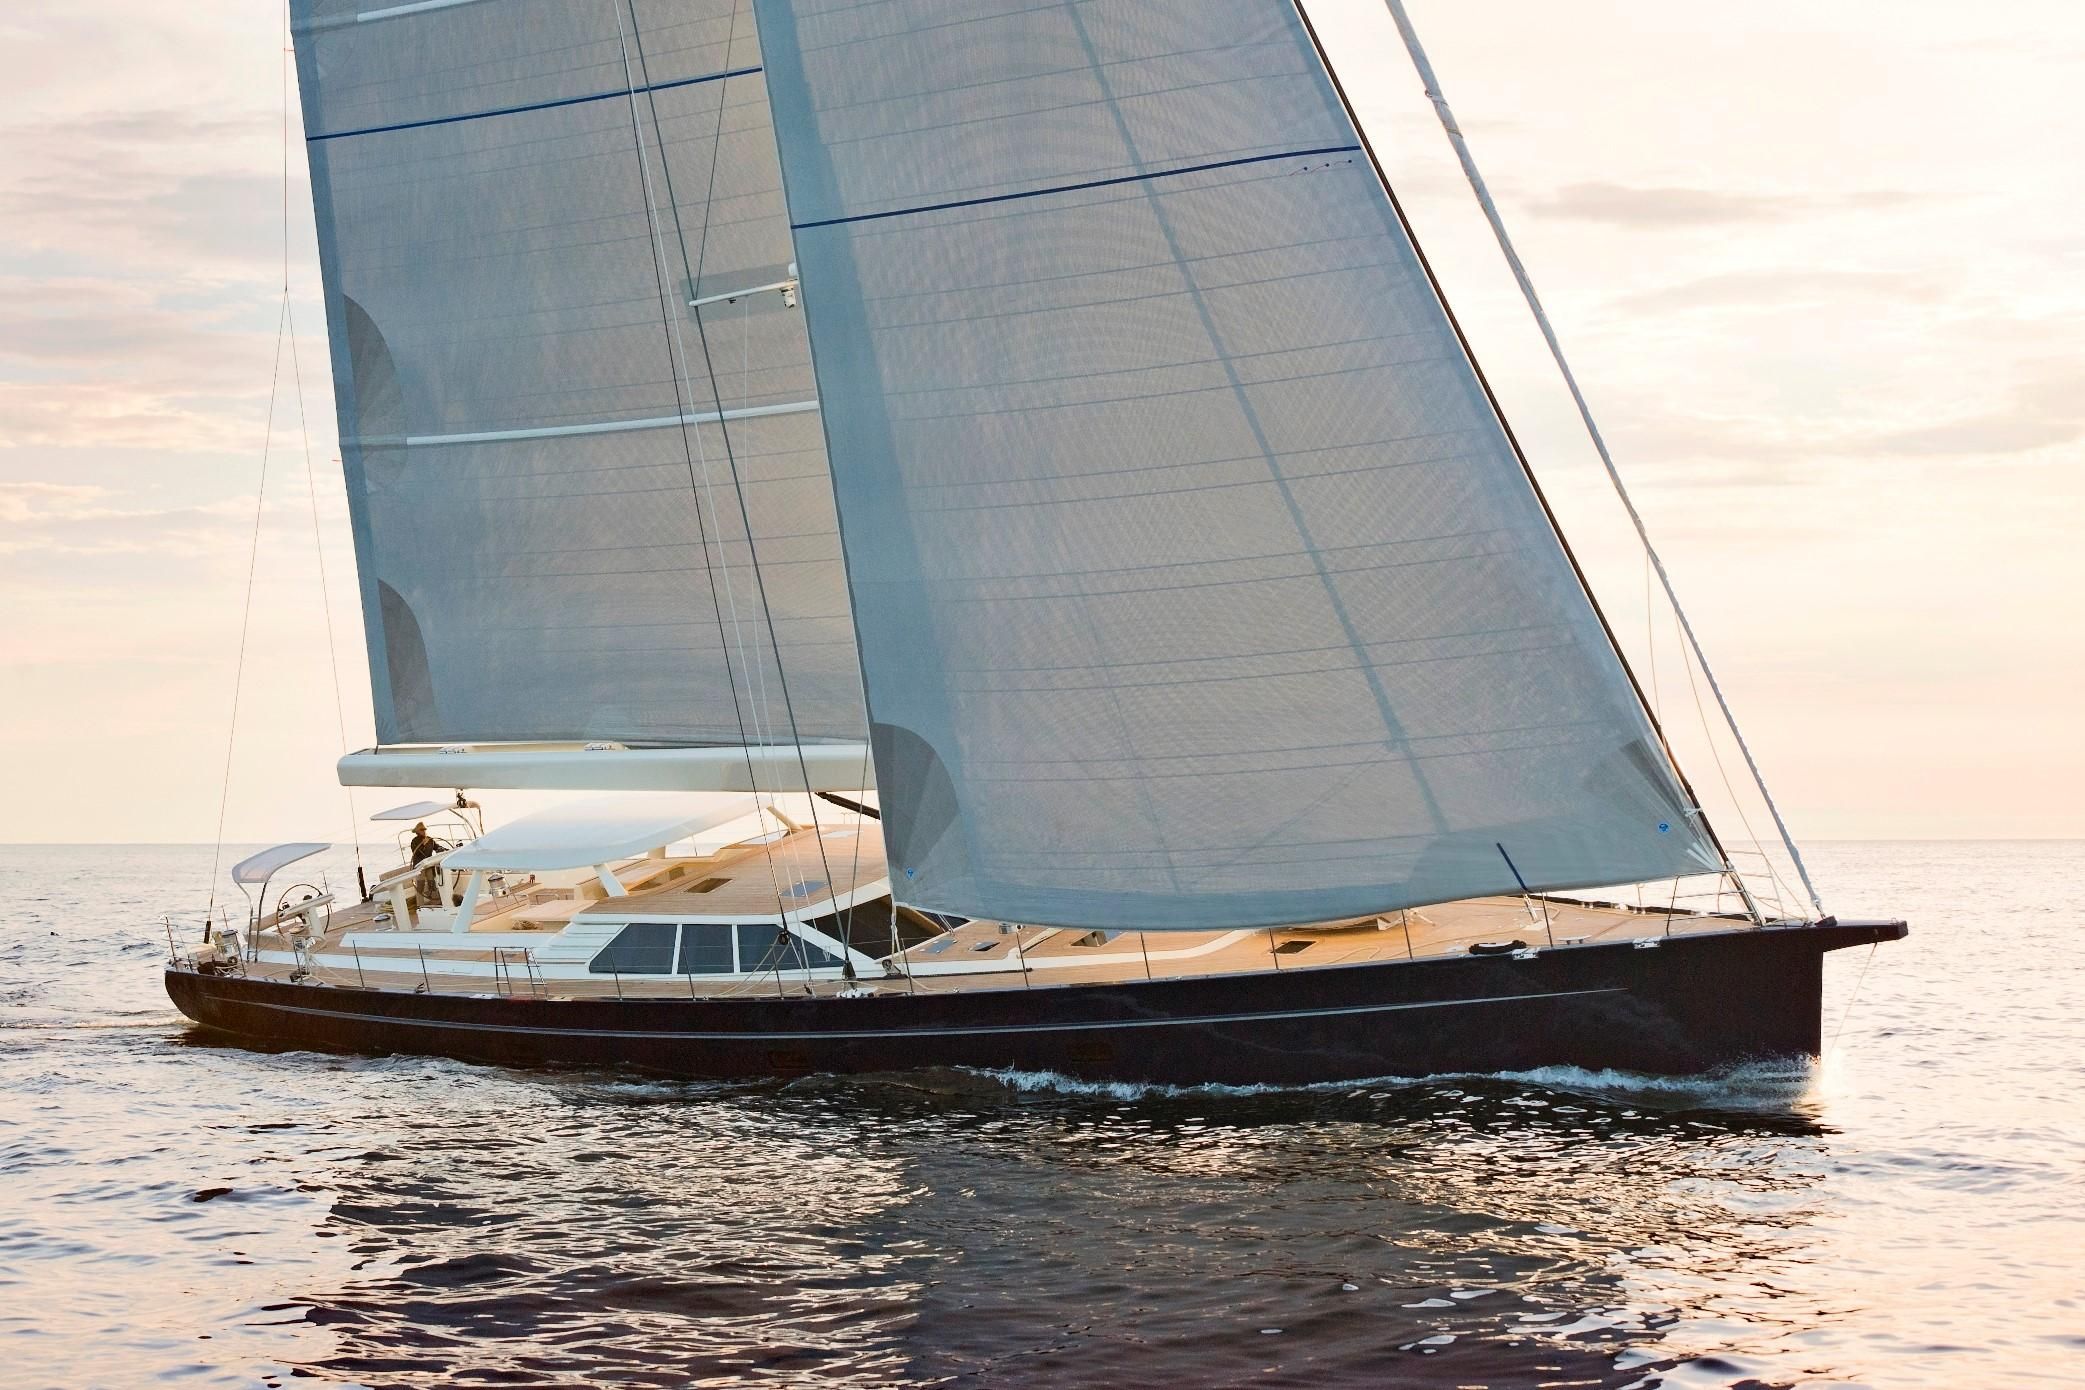 baltic yachts for sale uk